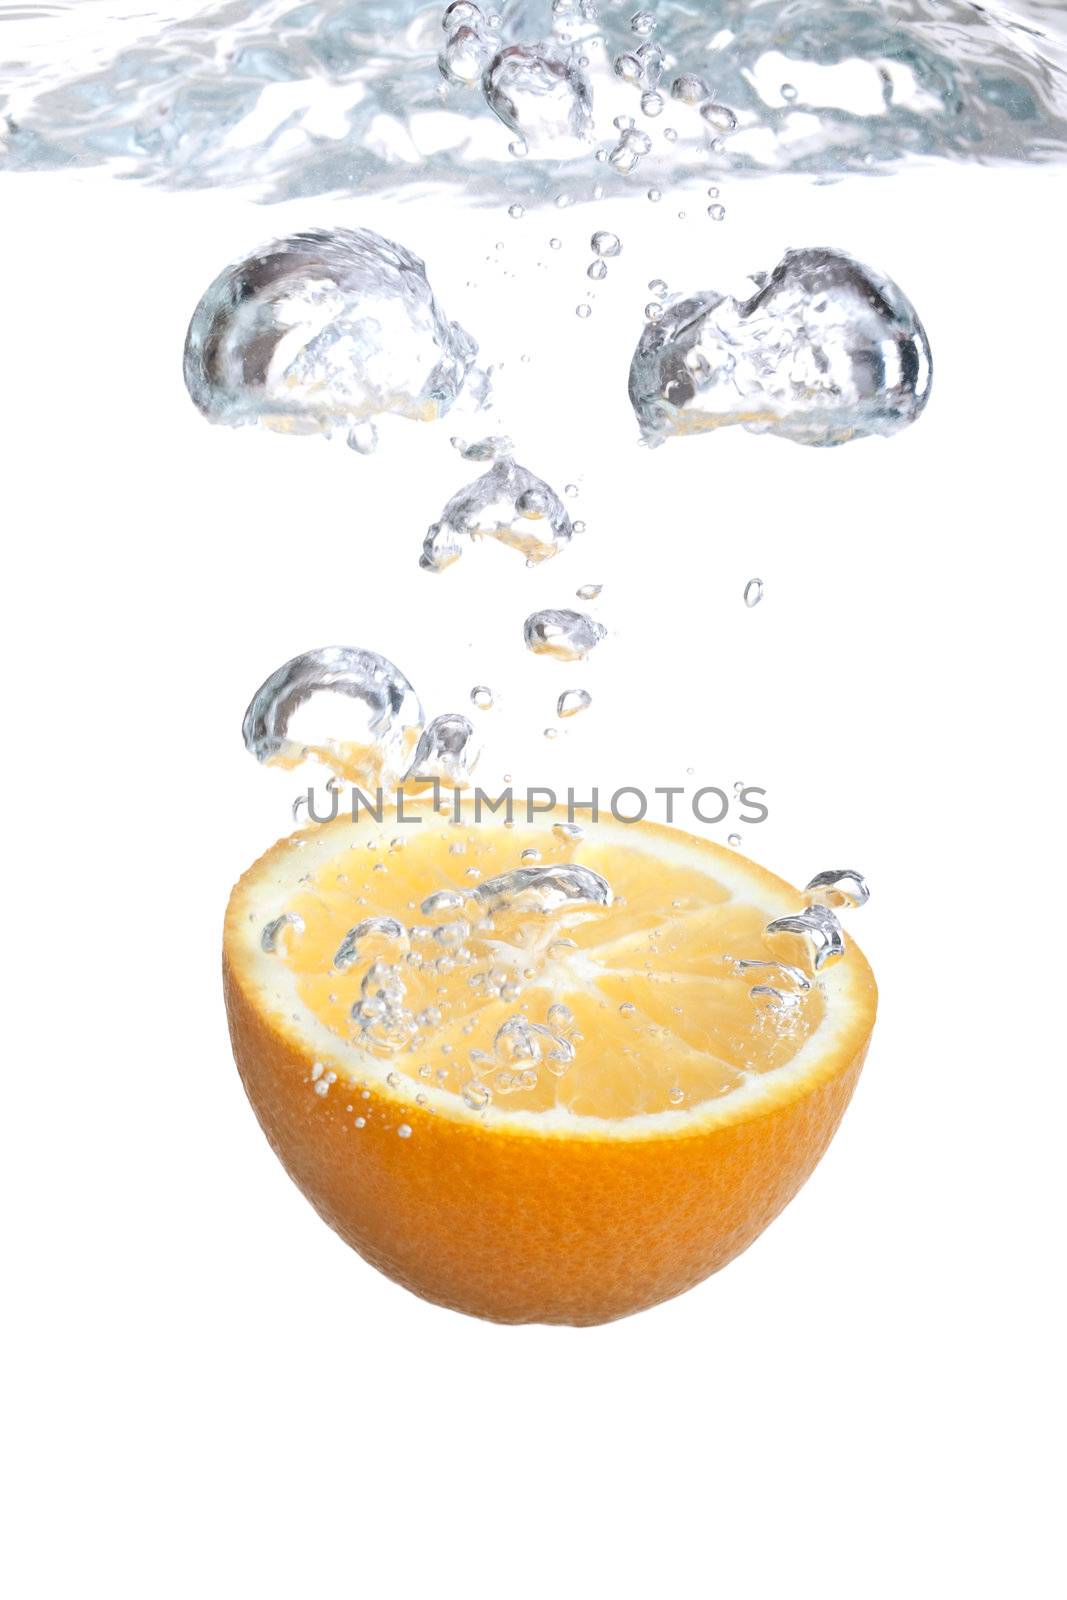 Orange falls into water on a white background